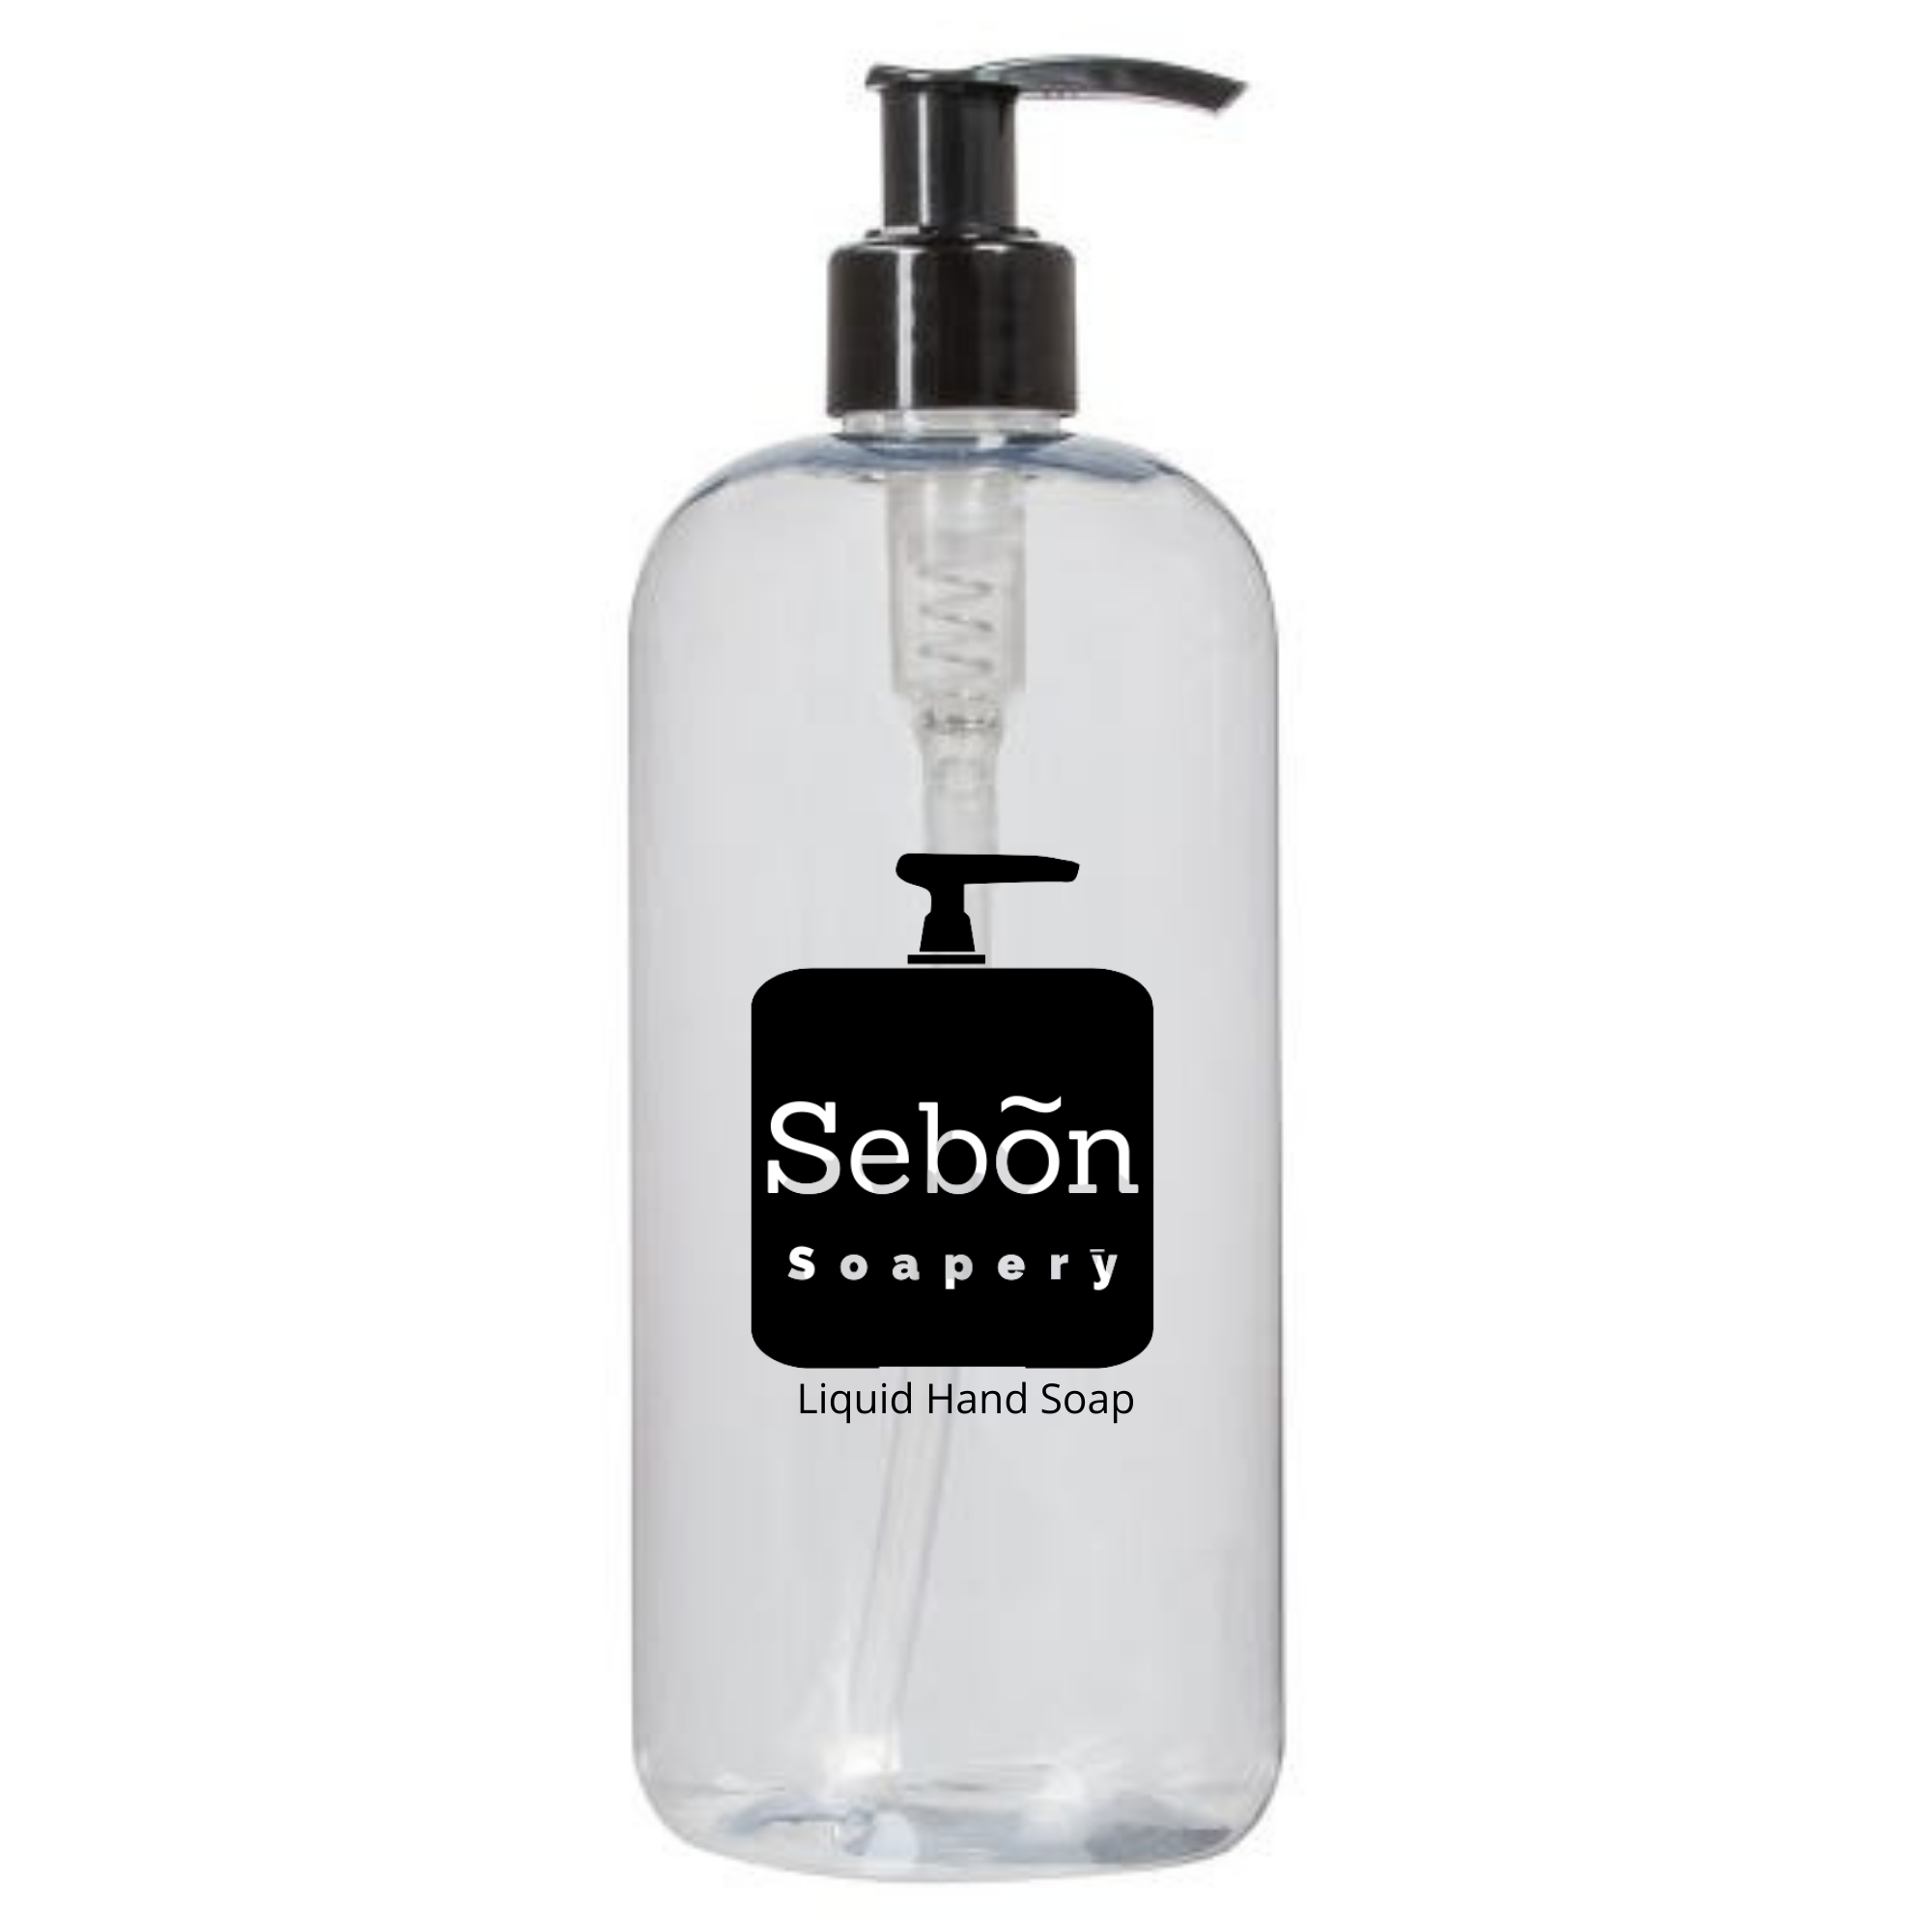 Sebon Dark Chocolate Scented Scented Liquid Hand Soap with Olive Oil